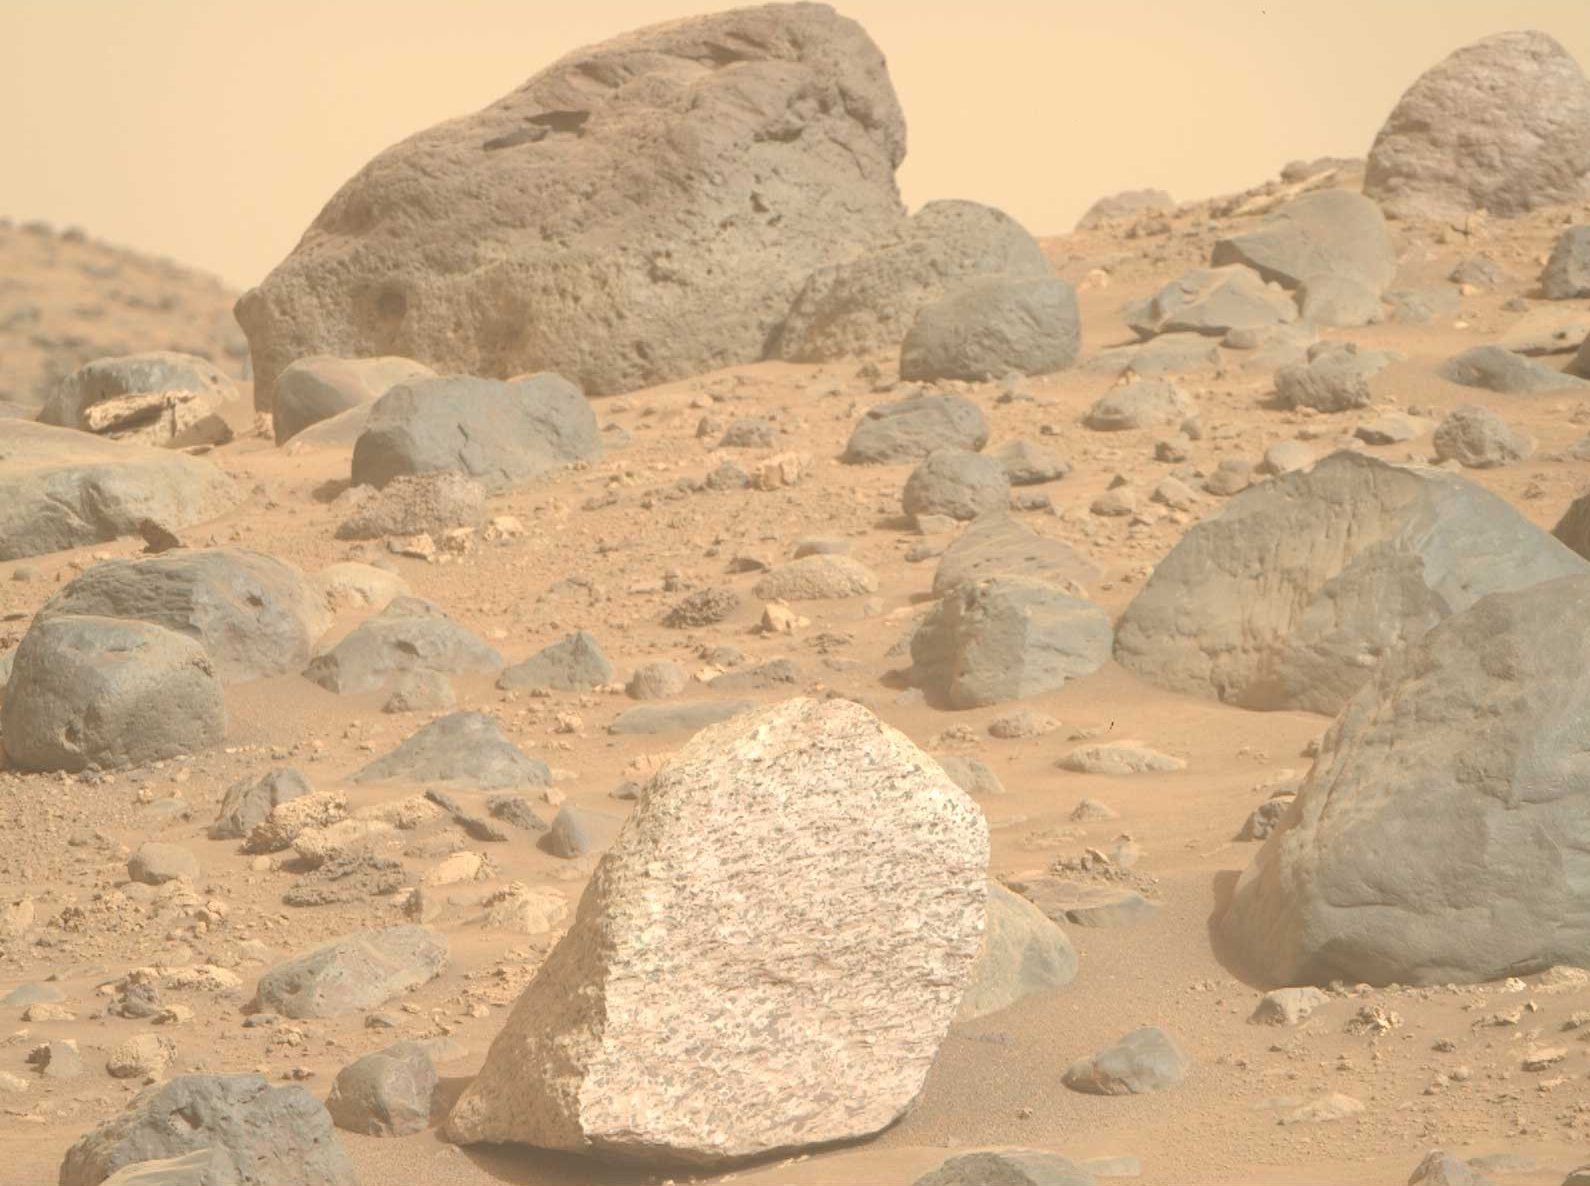 Images of large rocks on Mars. NASA's Mars Perseverance rover acquired this image using its Right Mastcam-Z camera. Mastcam-Z is a pair of cameras located high on the rover's mast.